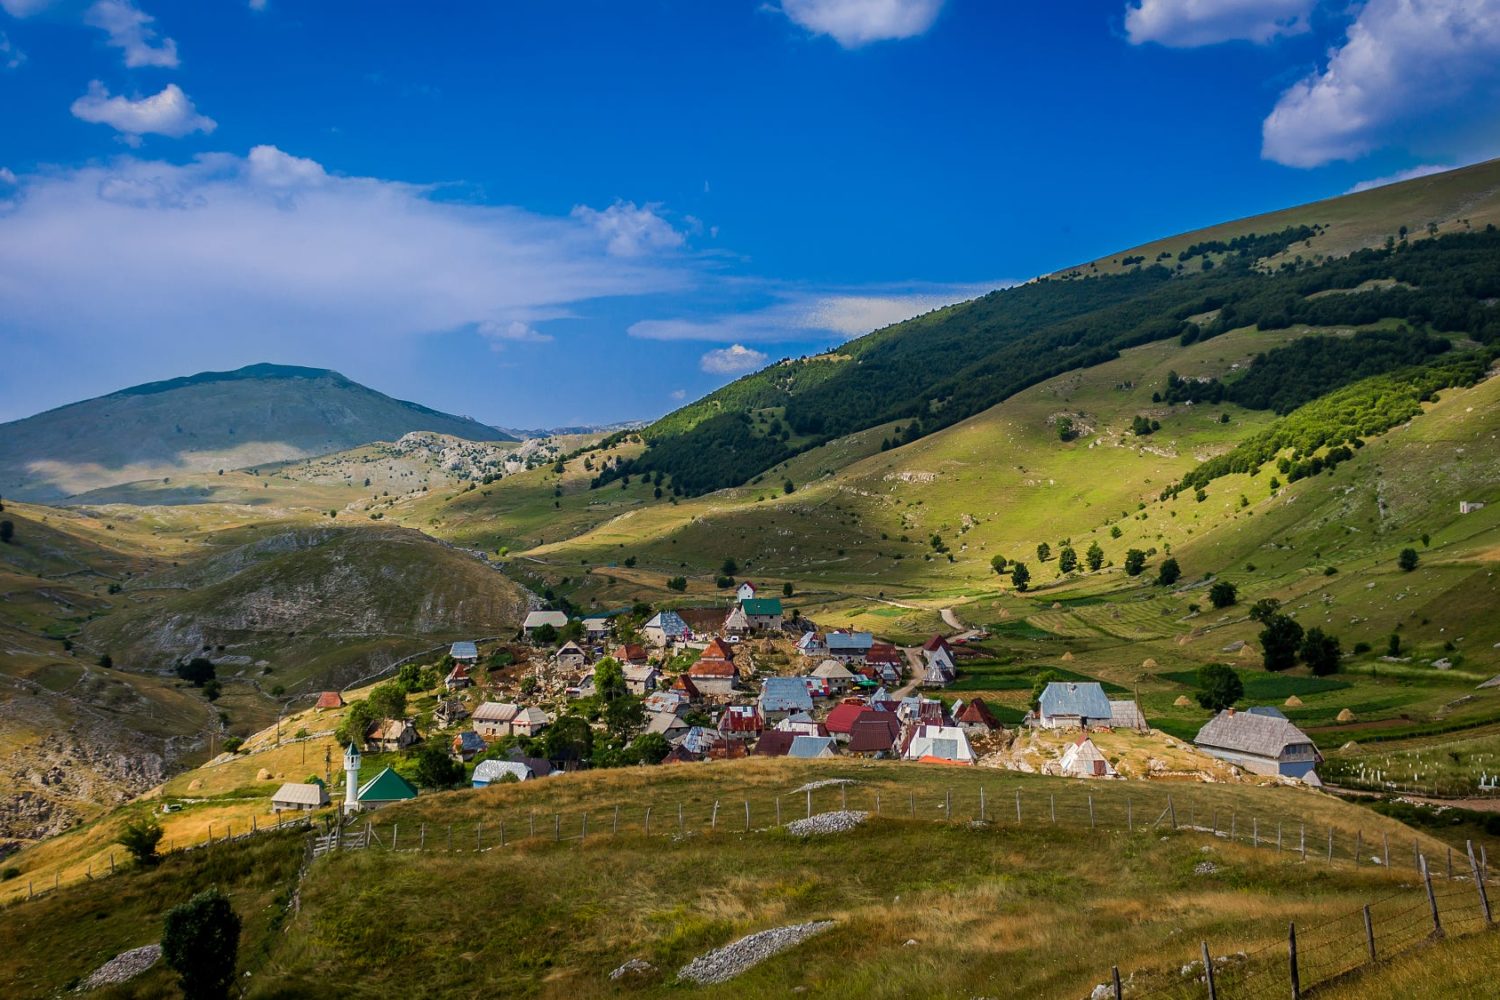 Scenic view of Lukomir village nestled in the mountains with clear blue skies